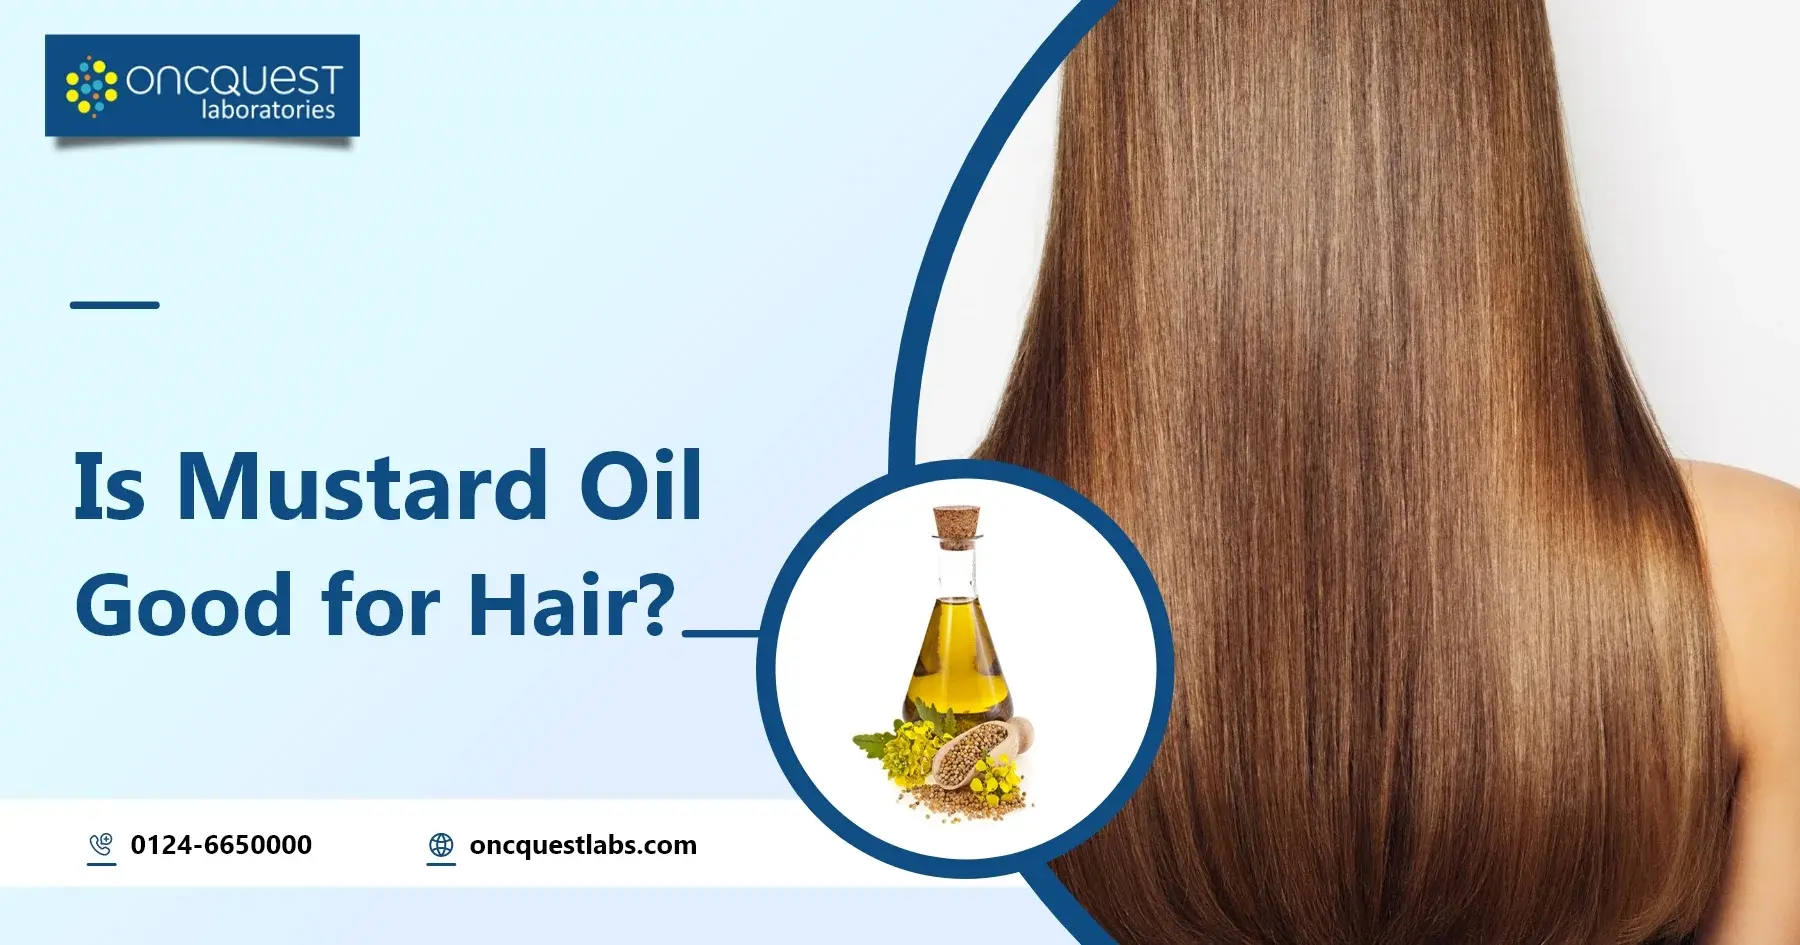 Is Mustard Oil Good for Hair?